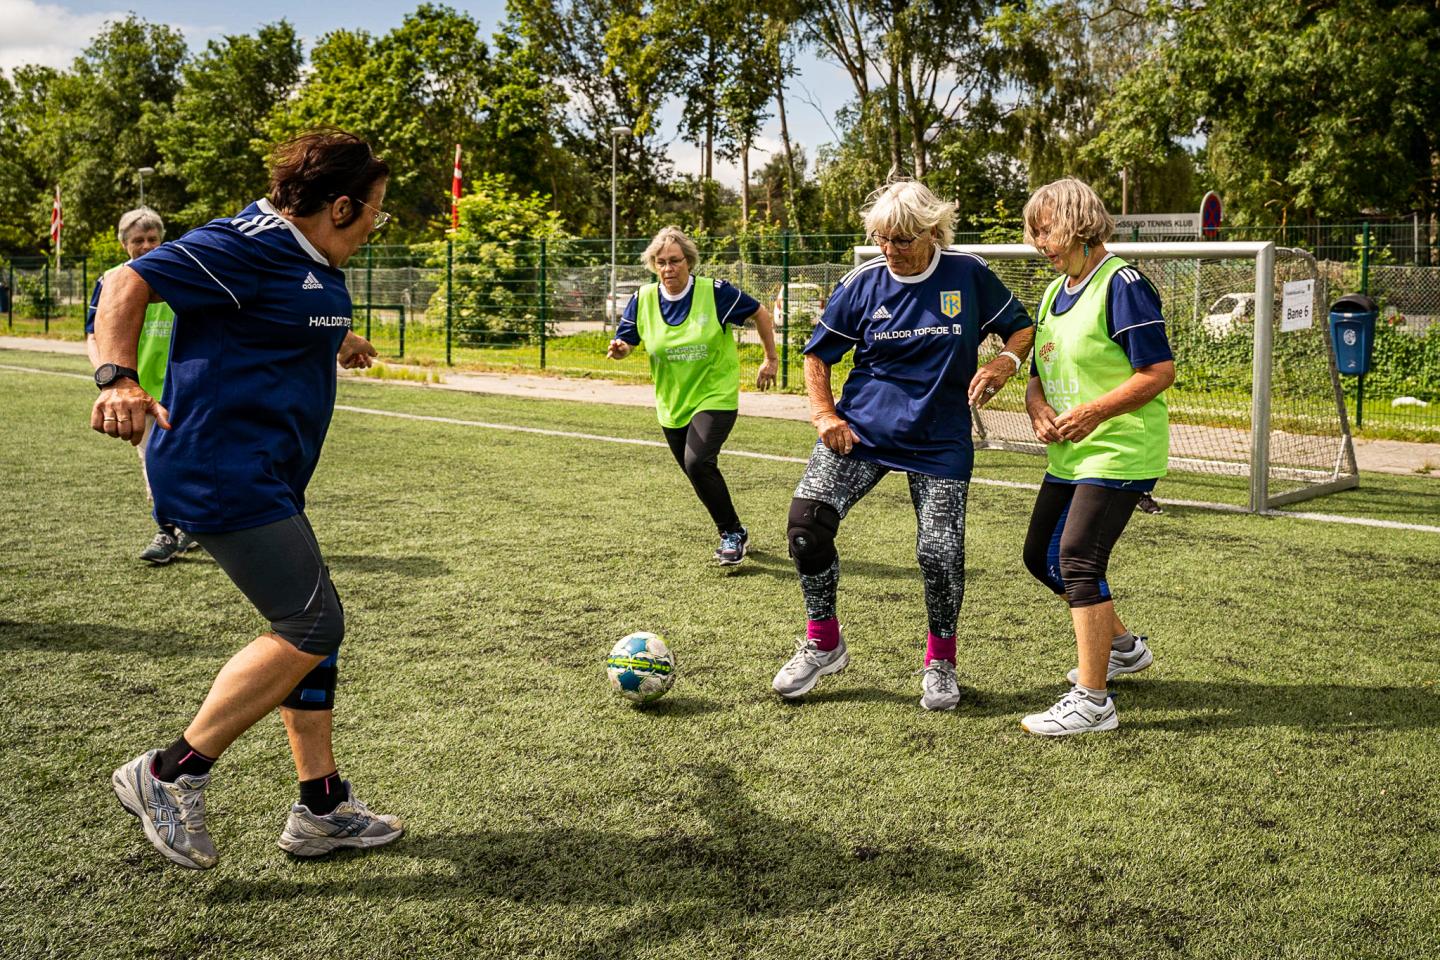 Football Scores a Health Hat-Trick for 55-70-Year-Old Women with Prediabetes